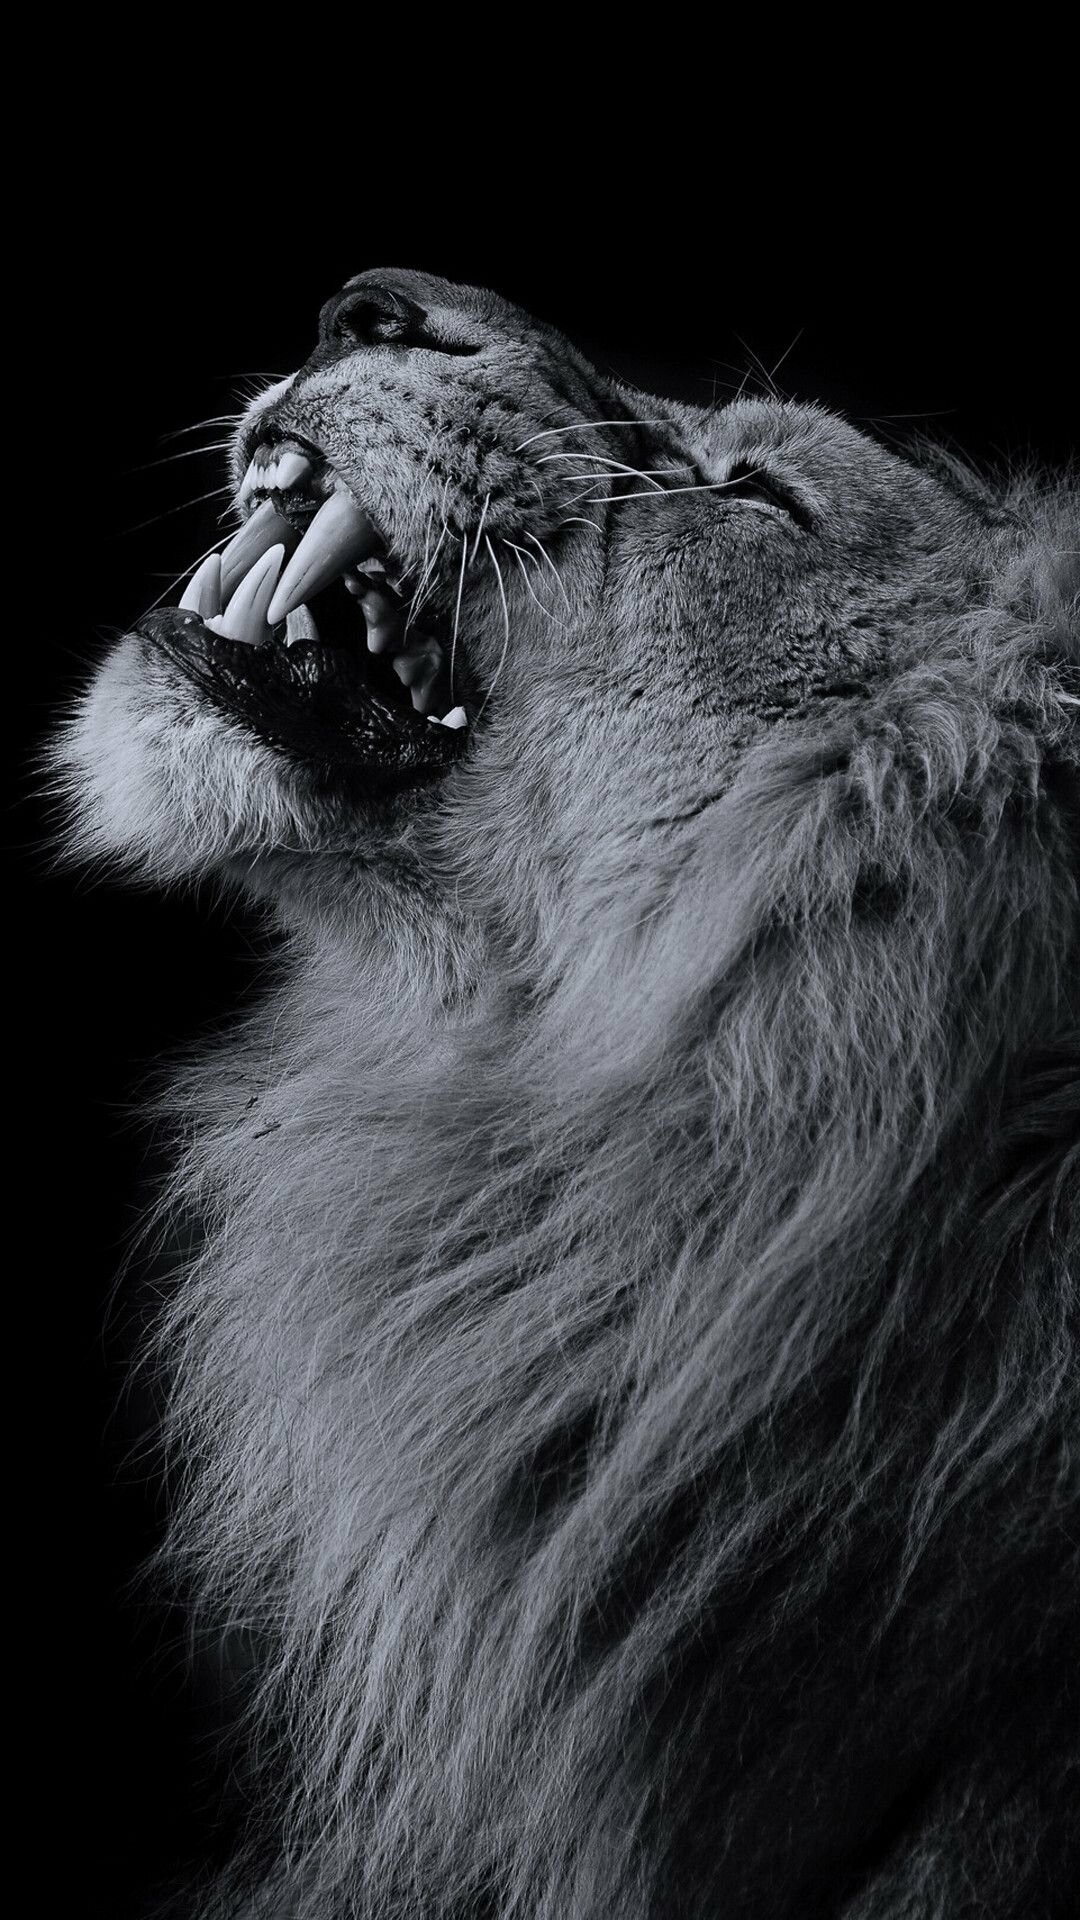 Lion: Males are unique among the cat species for their thick mane of brown or black hair encircling their head and neck, Monochrome. 1080x1920 Full HD Wallpaper.